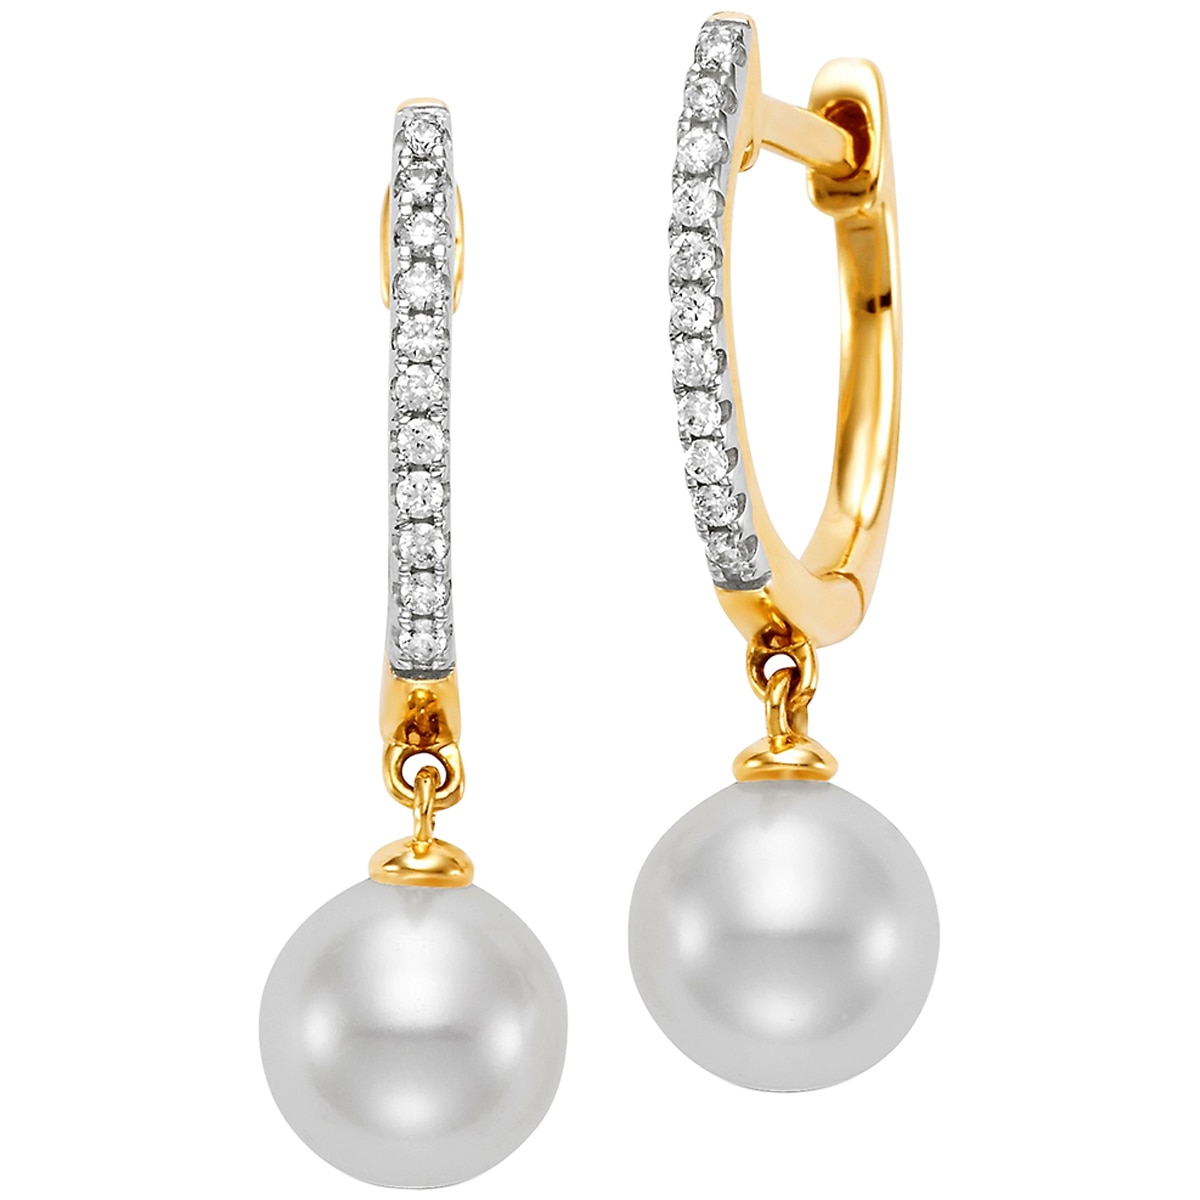 18KT Yellow Gold White Freshwater Pearl and Diamond Earrings